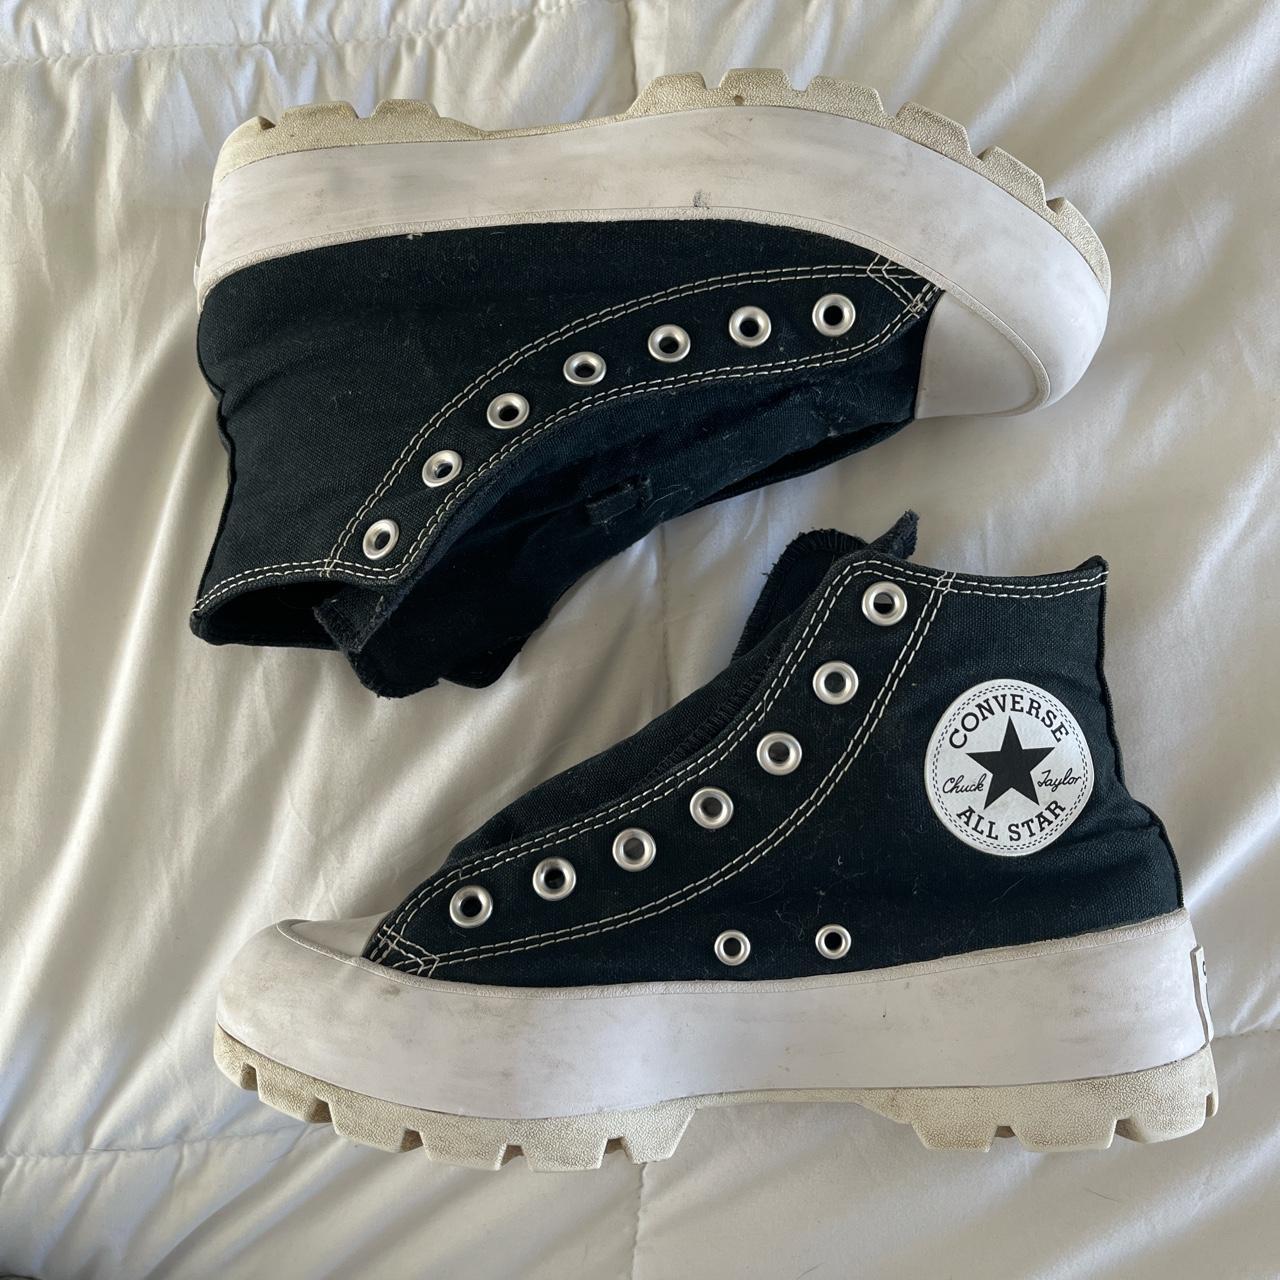 Converse Women's Black and White Trainers | Depop